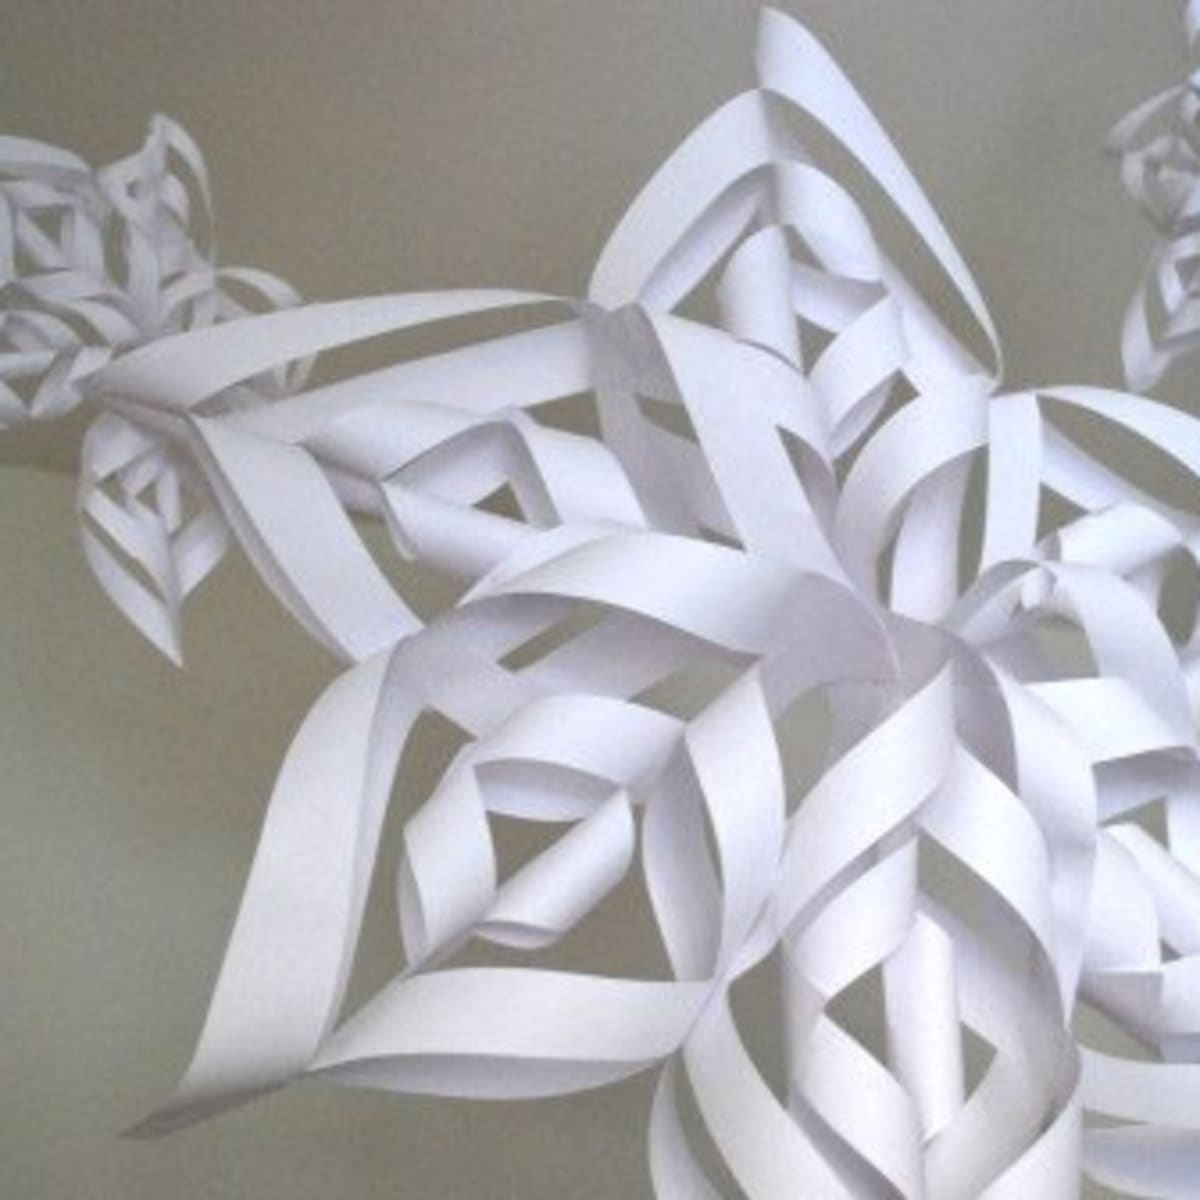 Paper Snowflakes - Christmas Holiday Arts and Crafts - December